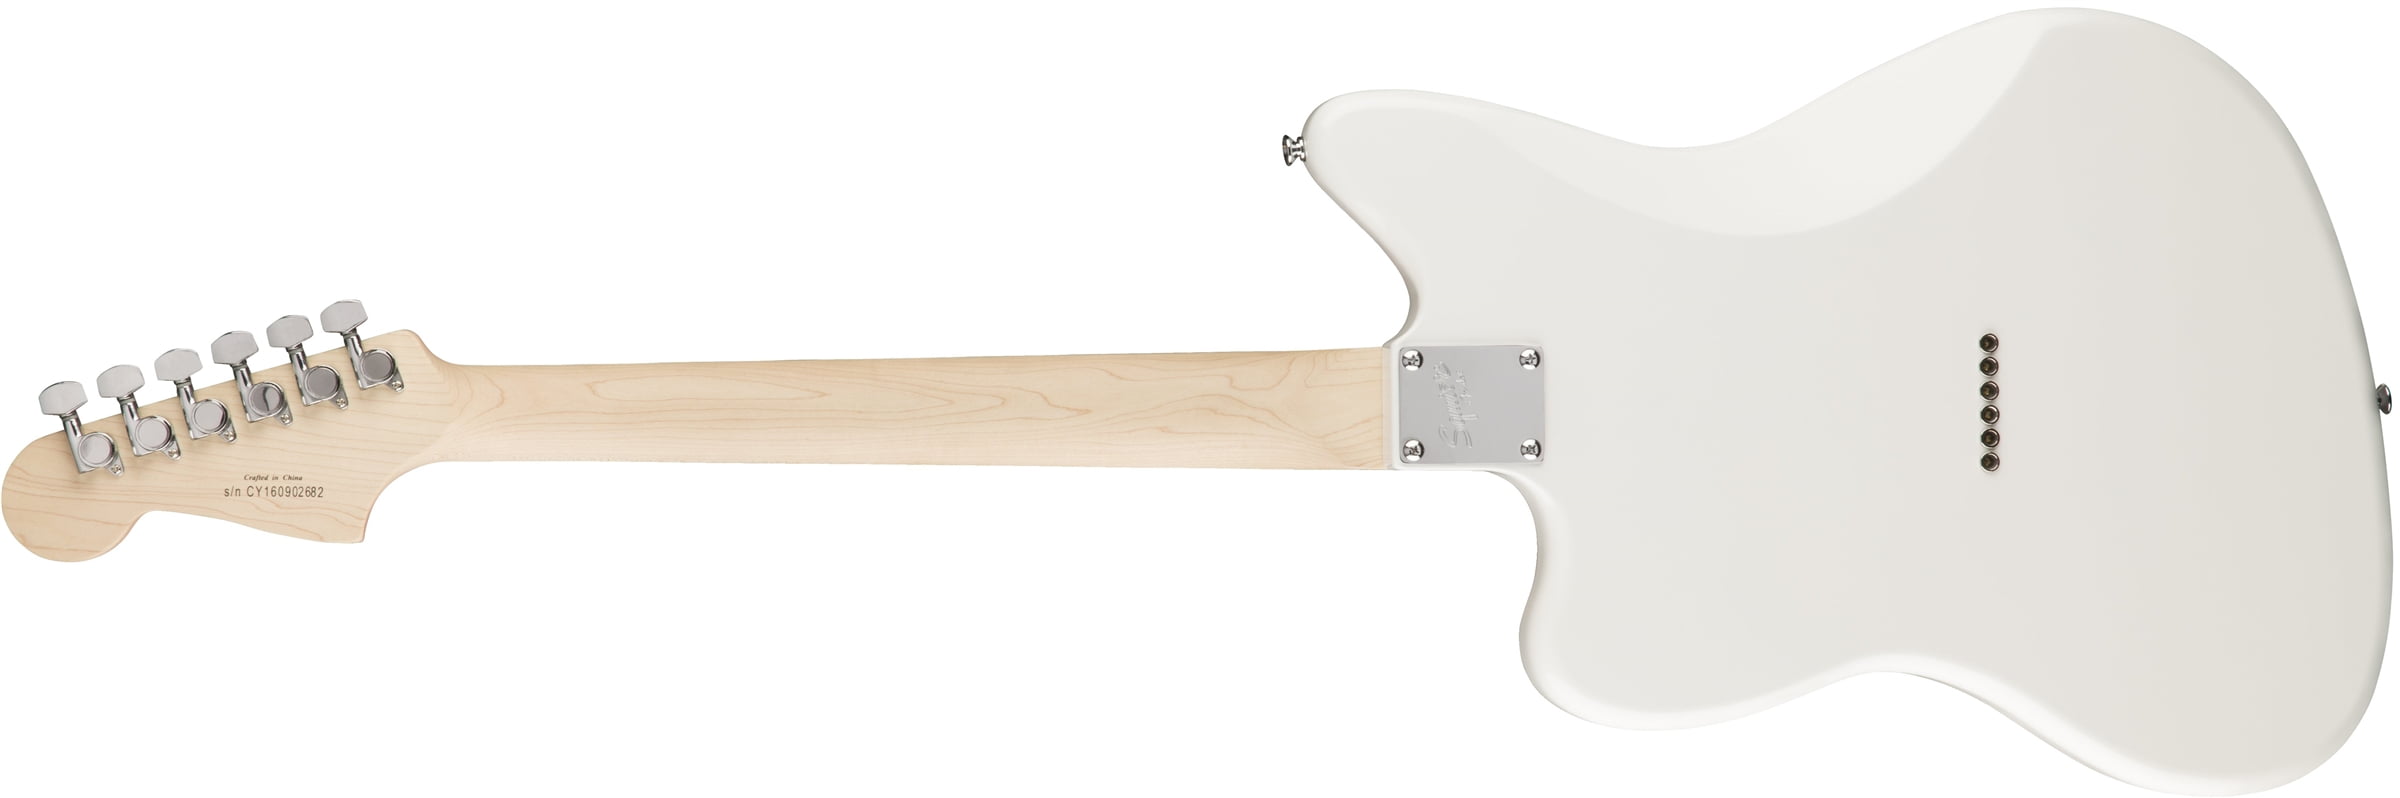 Fender Squier Affinity Series Jazzmaster HH Electric Guitar, Rosewood  Fingerboard - Arctic White